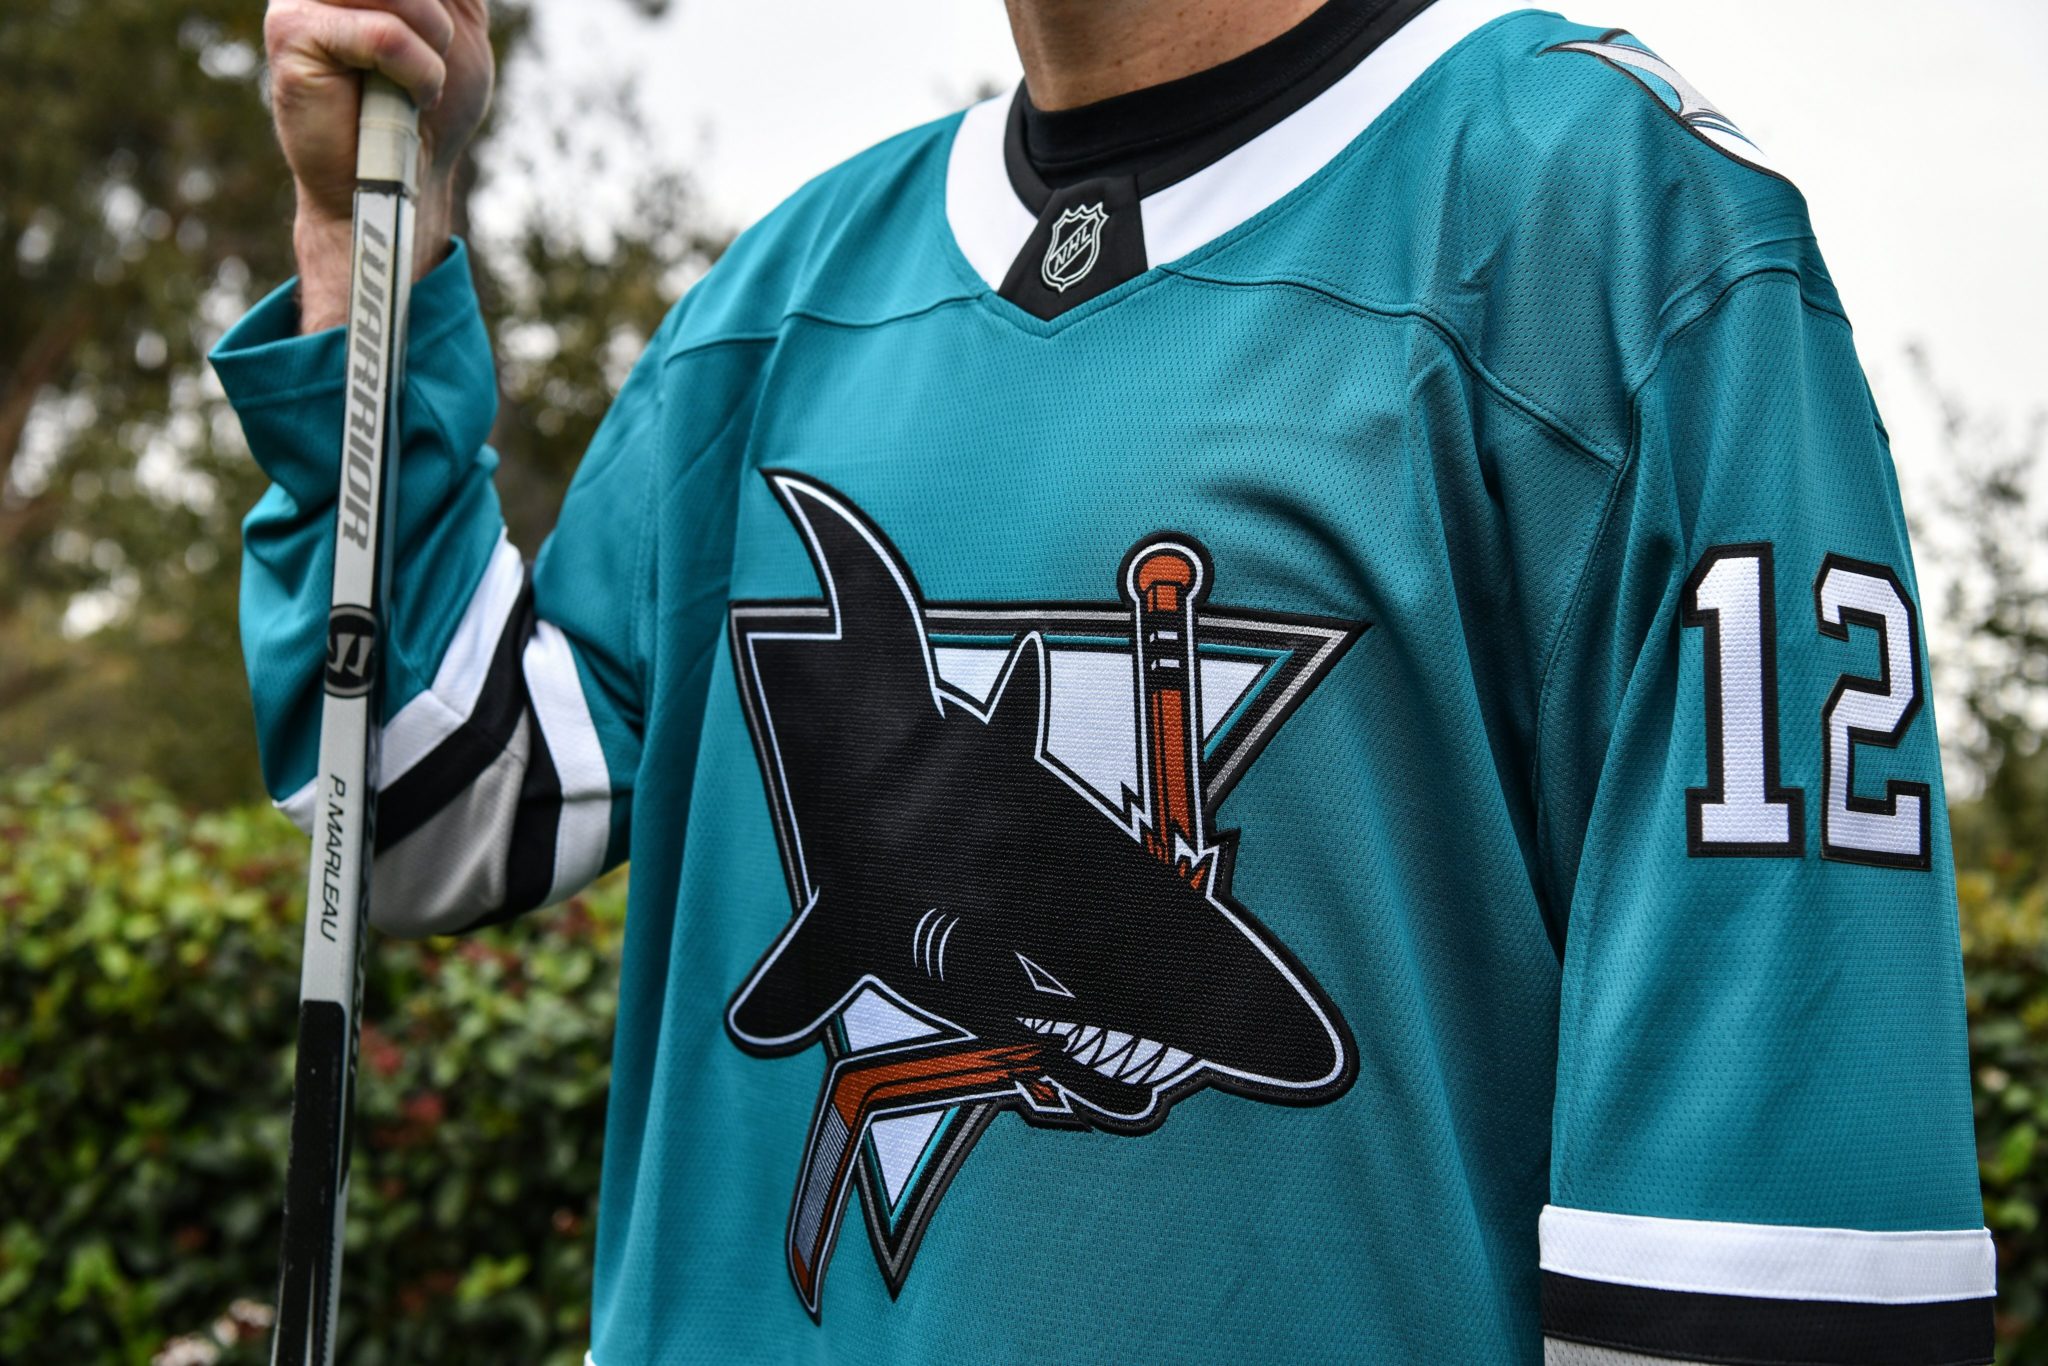 Youth Teal San Jose Sharks 30th Anniversary Premier Jersey (Size L/XL)